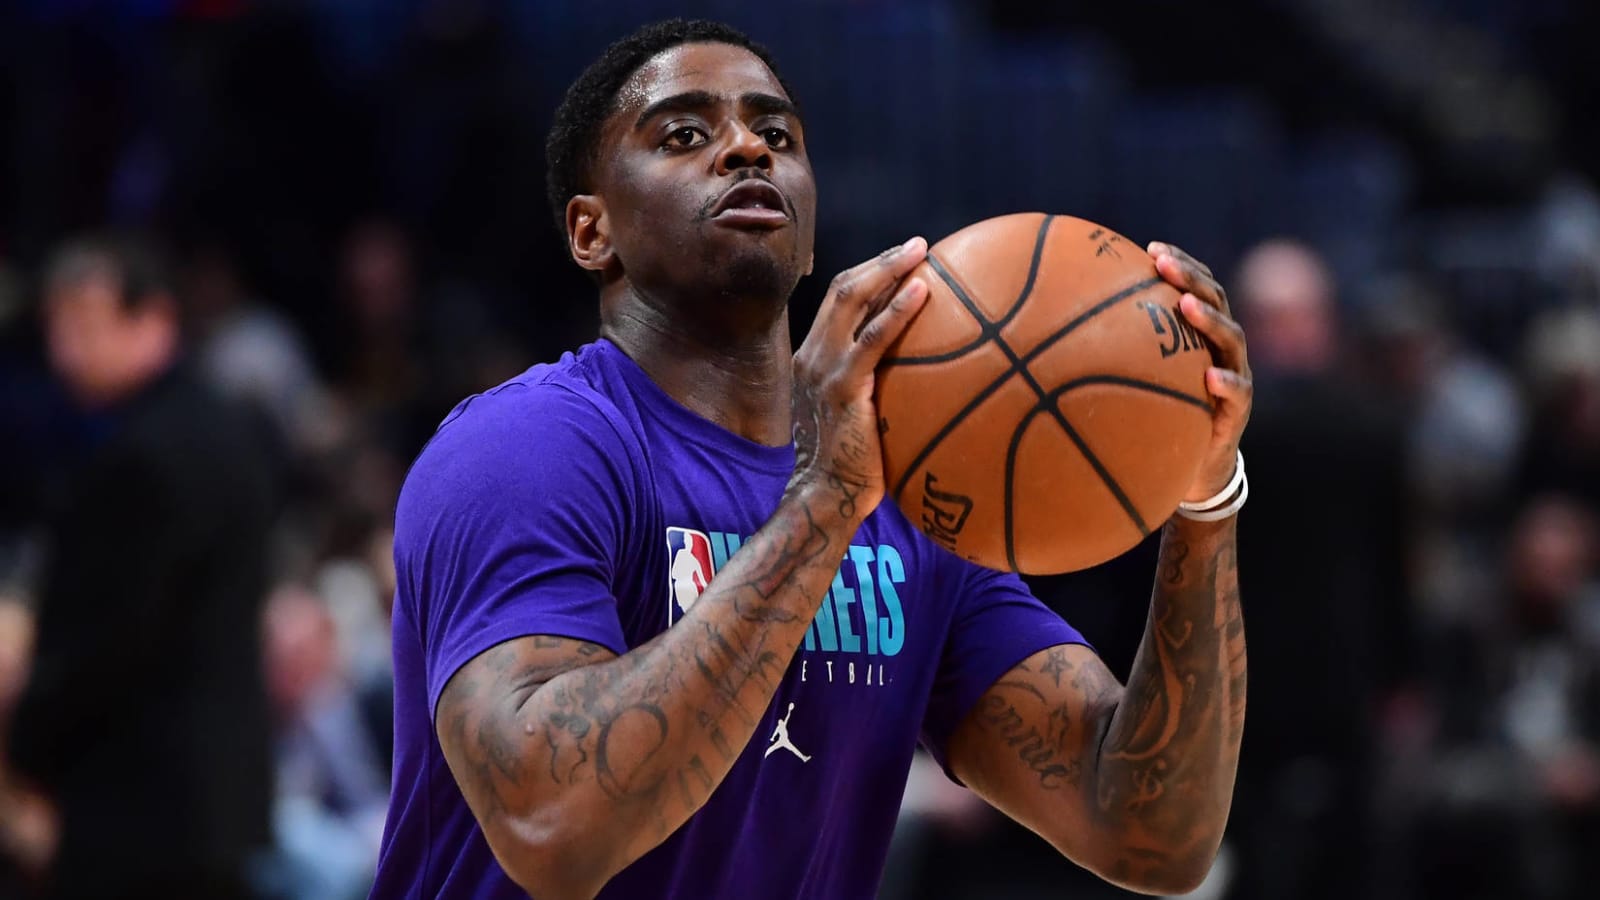 Magic signing guard Dwayne Bacon to two-year deal